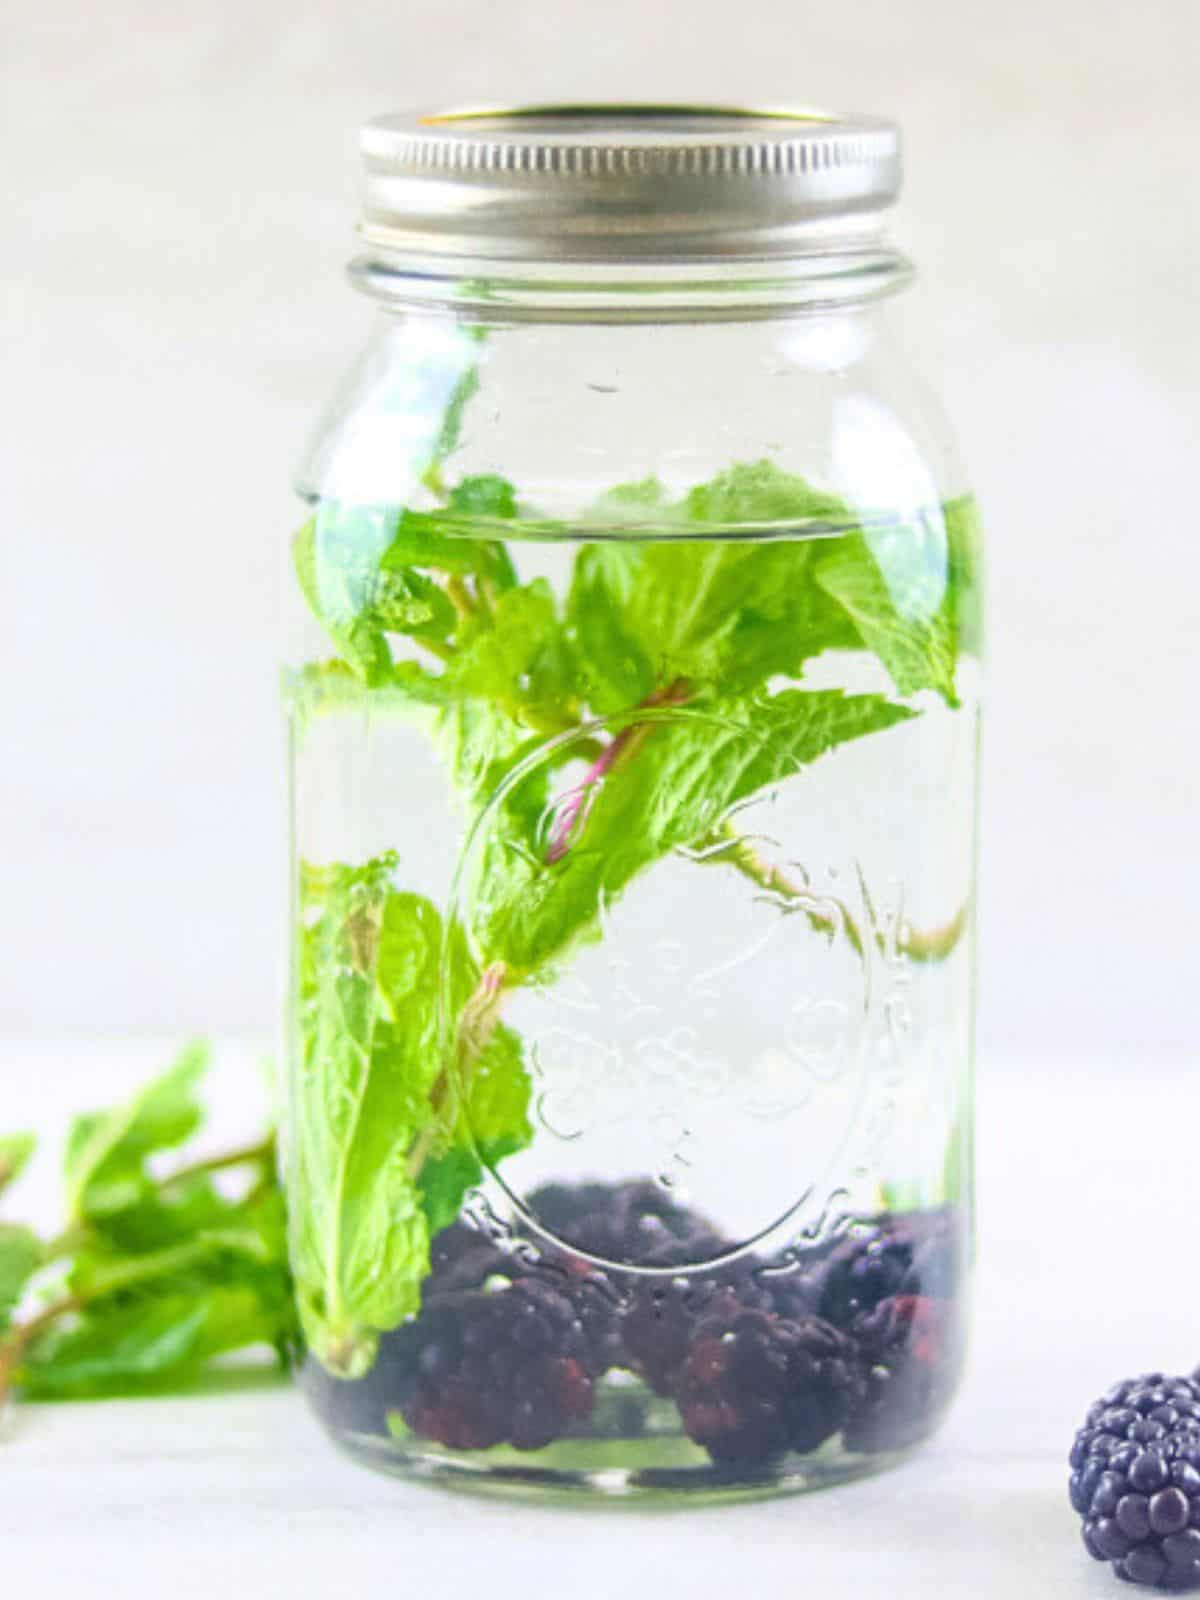 Mason Jar with infused water made with mint and blackberries.